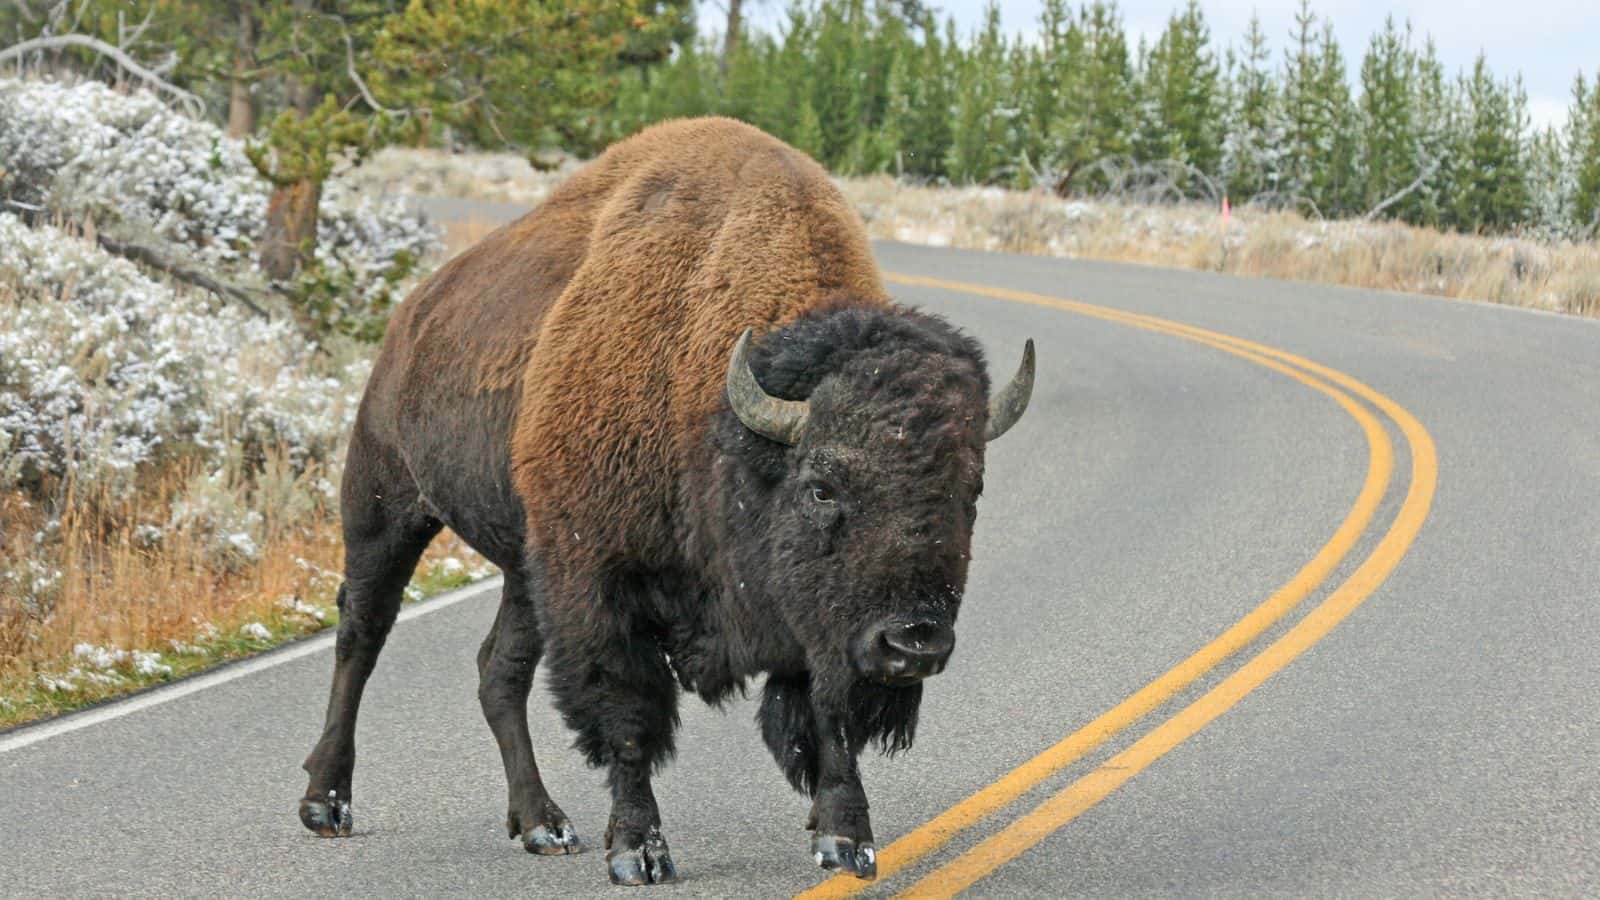 Bison in Road